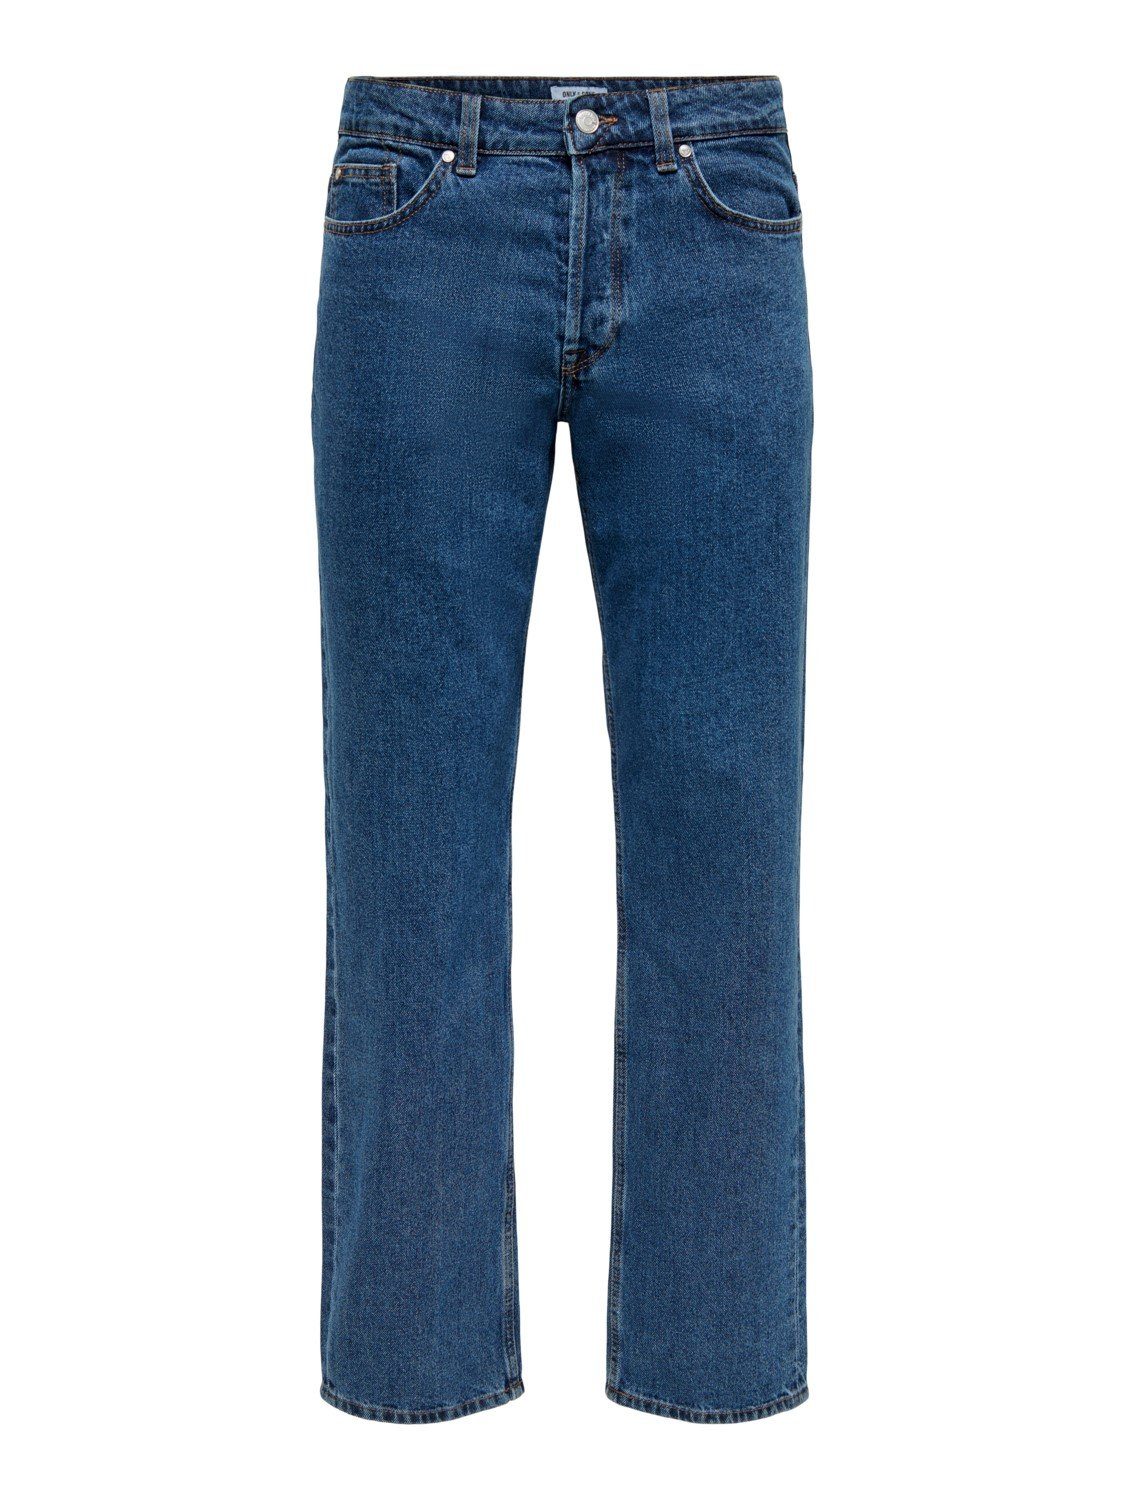 ONLY & SONS Relax-fit-Jeans ONSEDGE D. BLUE 3813 aus Baumwolle